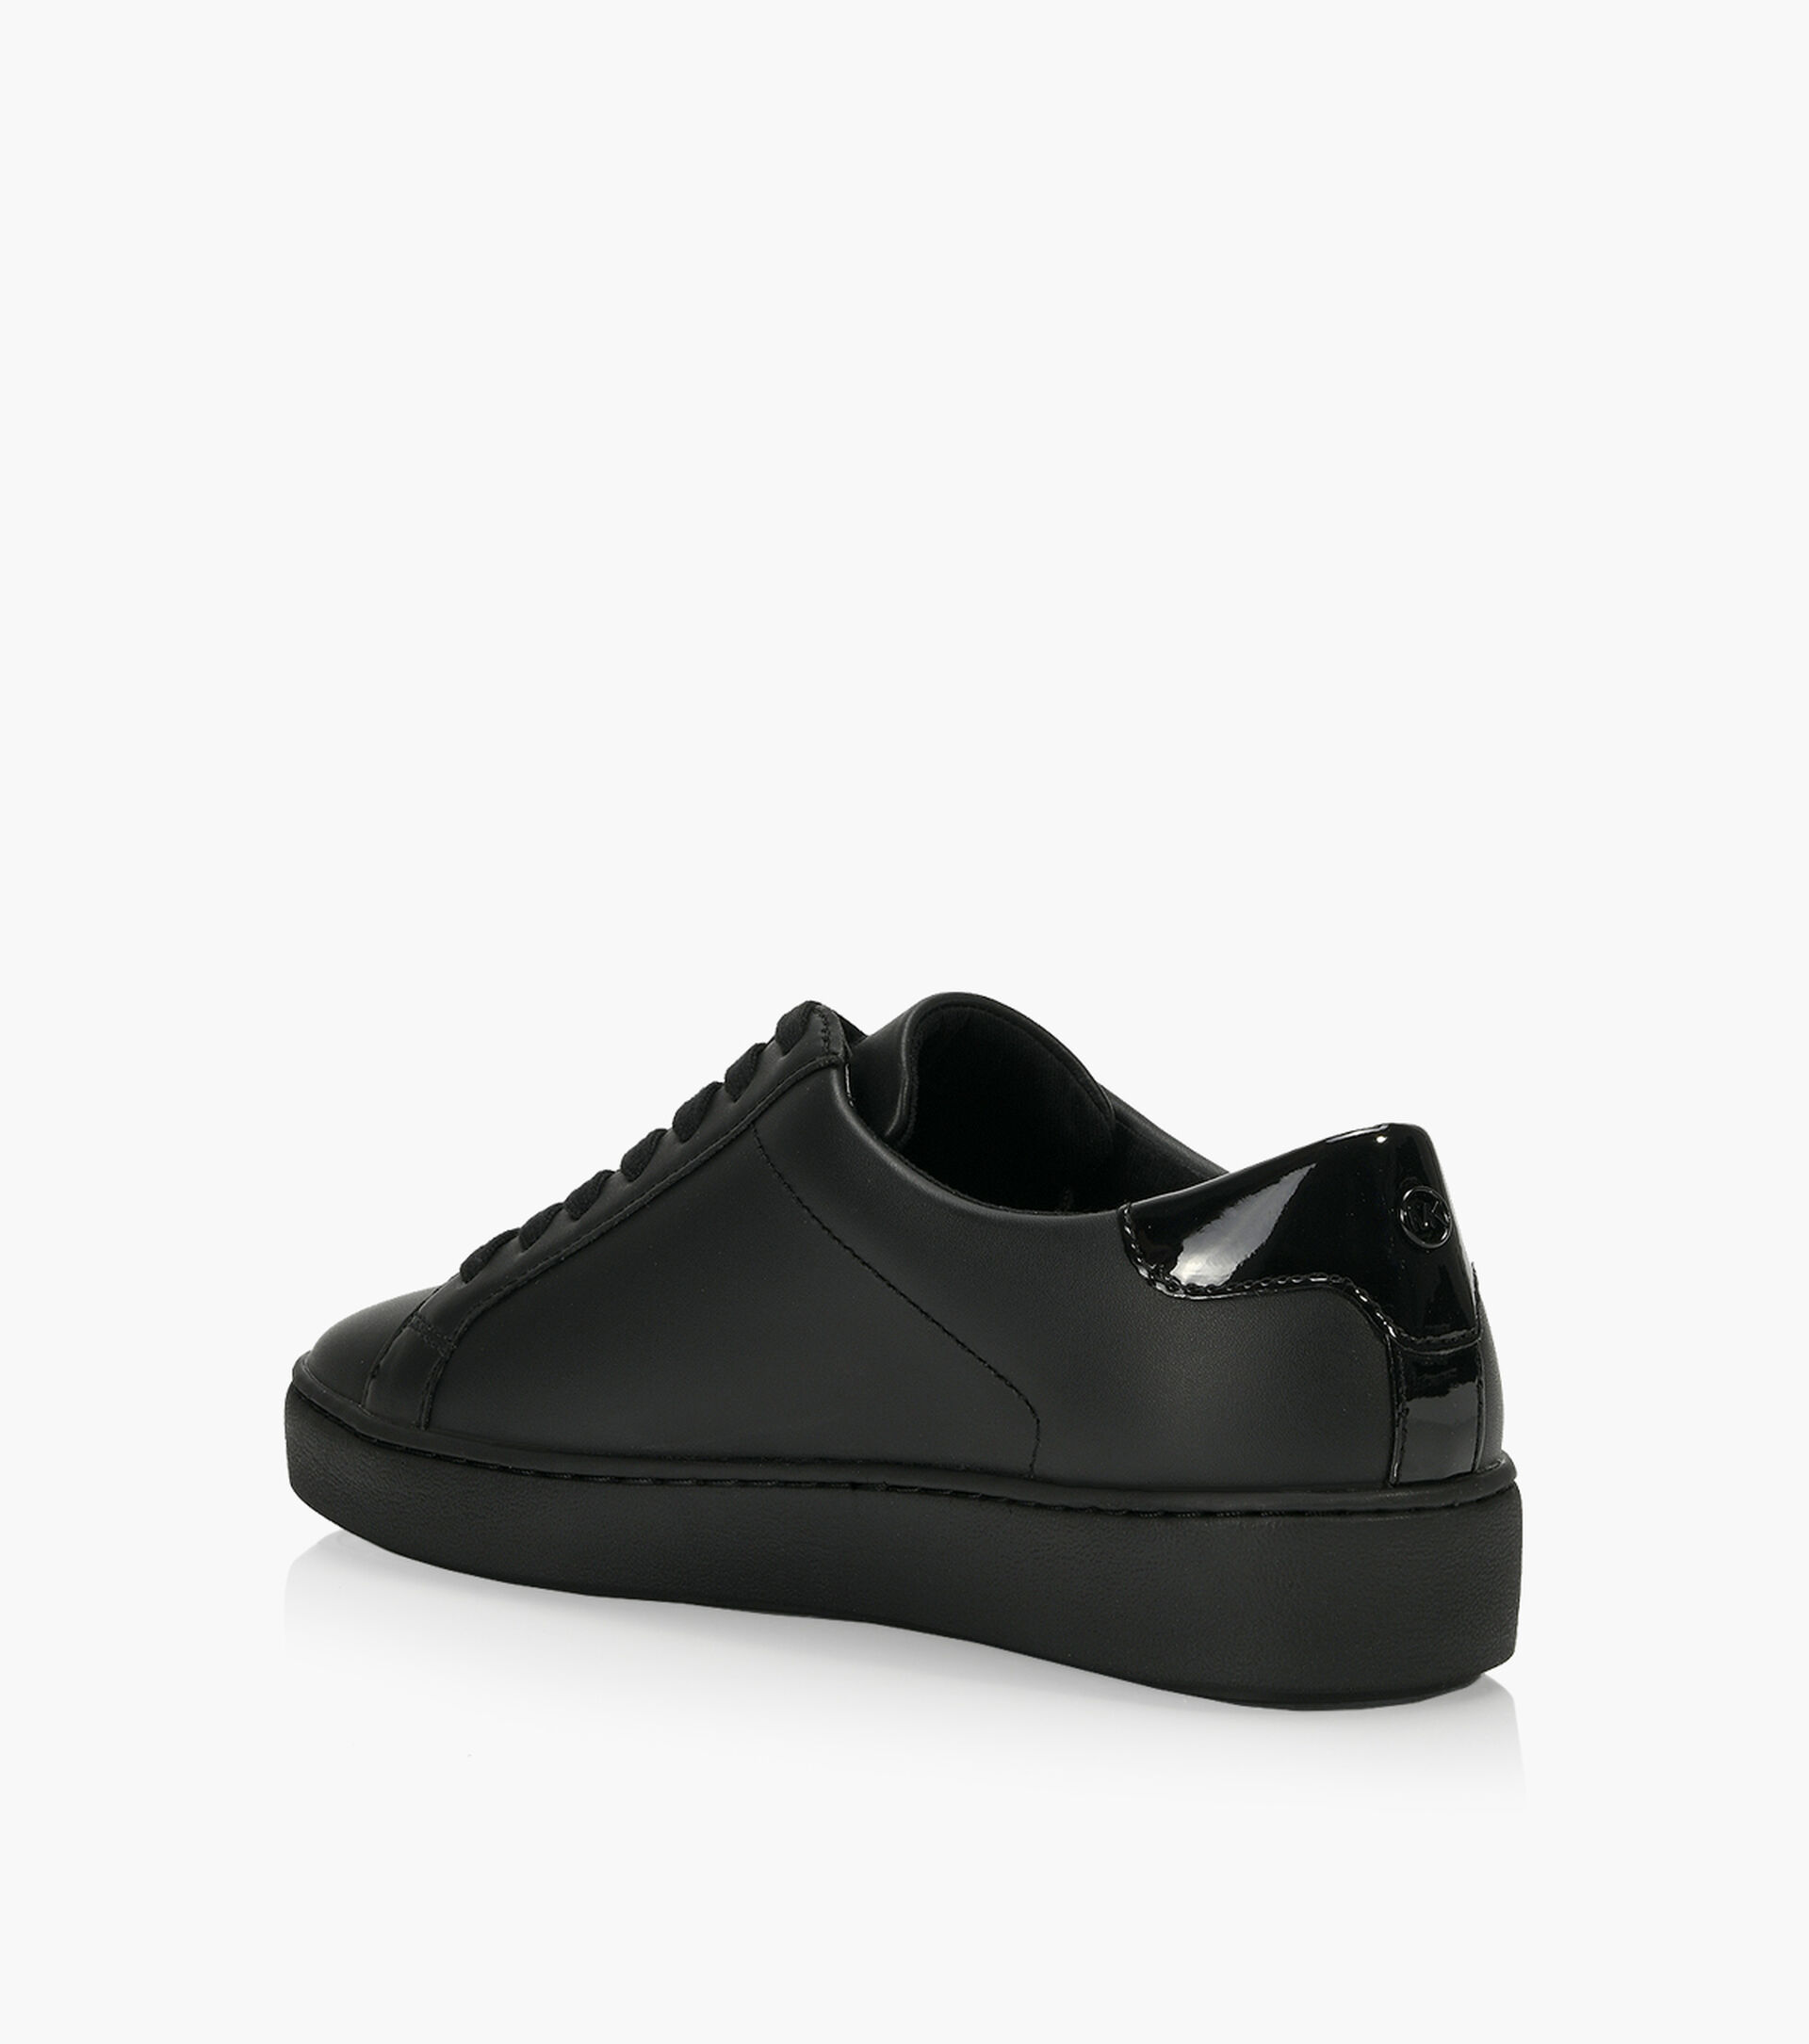 MICHAEL MICHAEL KORS IRVING LACE UP - Black Leather | Browns Shoes